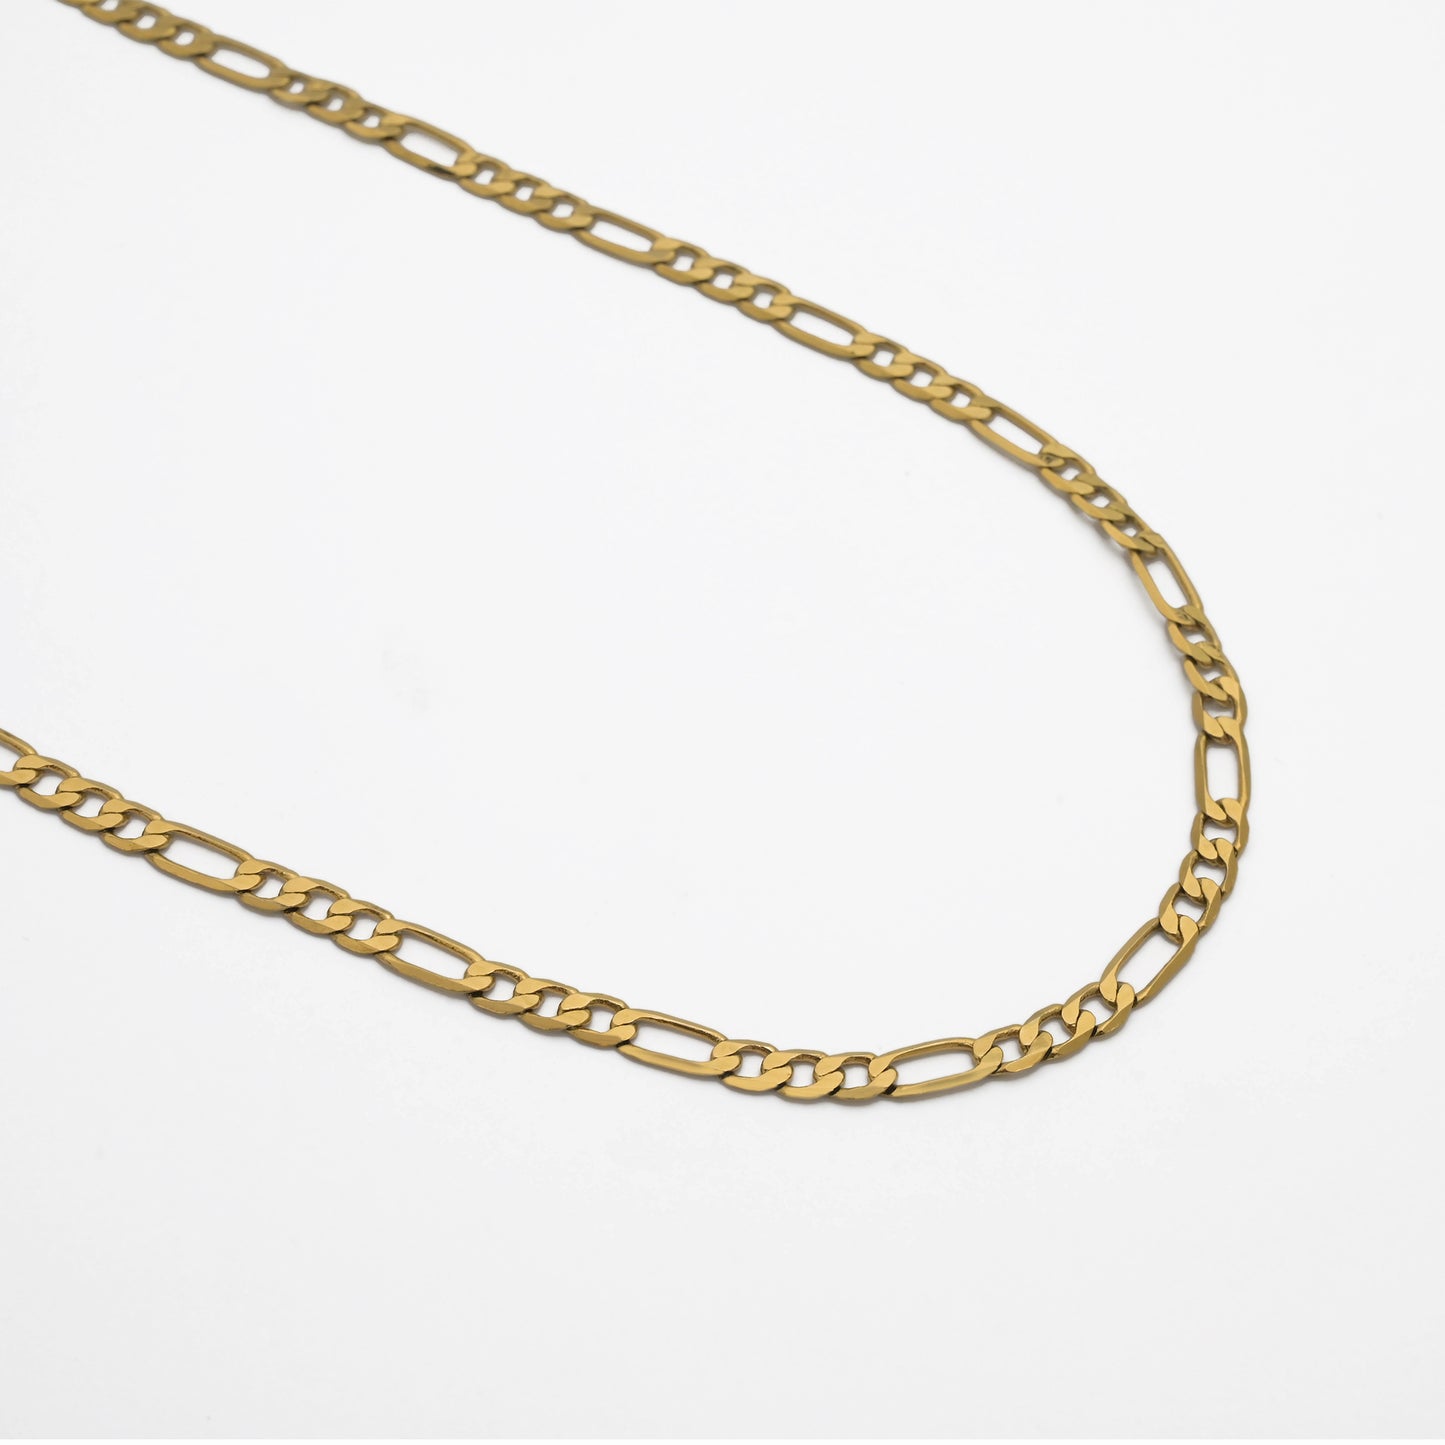 Shiny Gold Curb Chain Necklace For Women